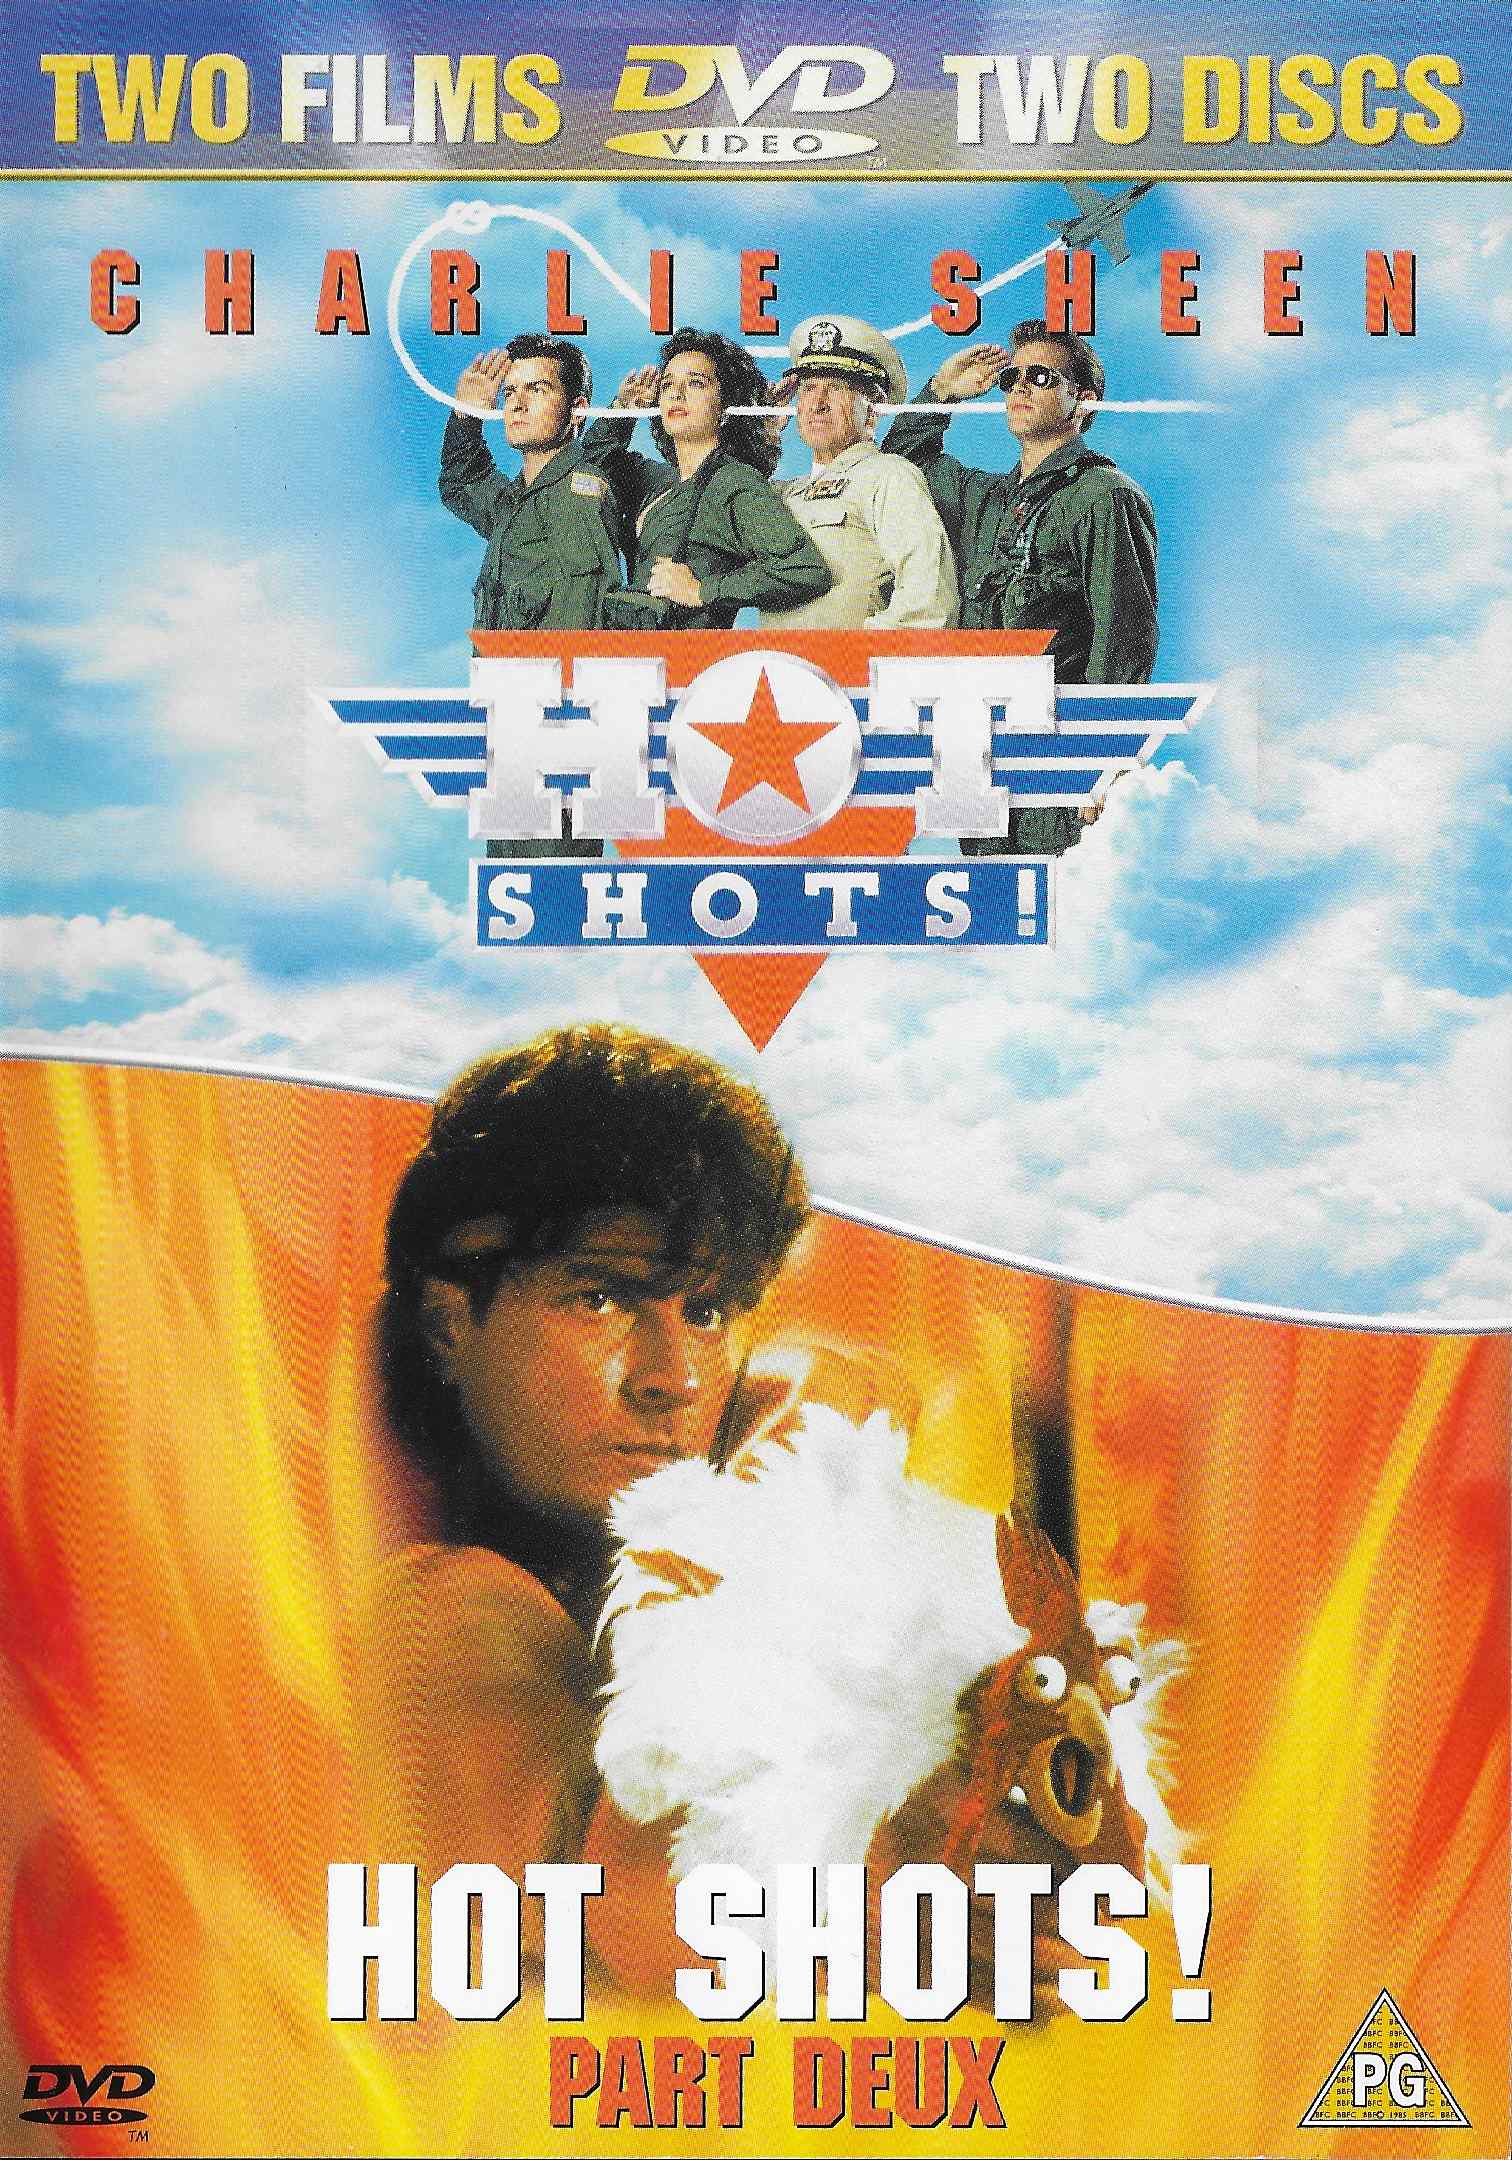 Picture of F1 - SGB 08610DVDC Hot shots! / Hot shots! Part deux by artist Jim Abrahams / Pat Proft from ITV, Channel 4 and Channel 5 dvds library